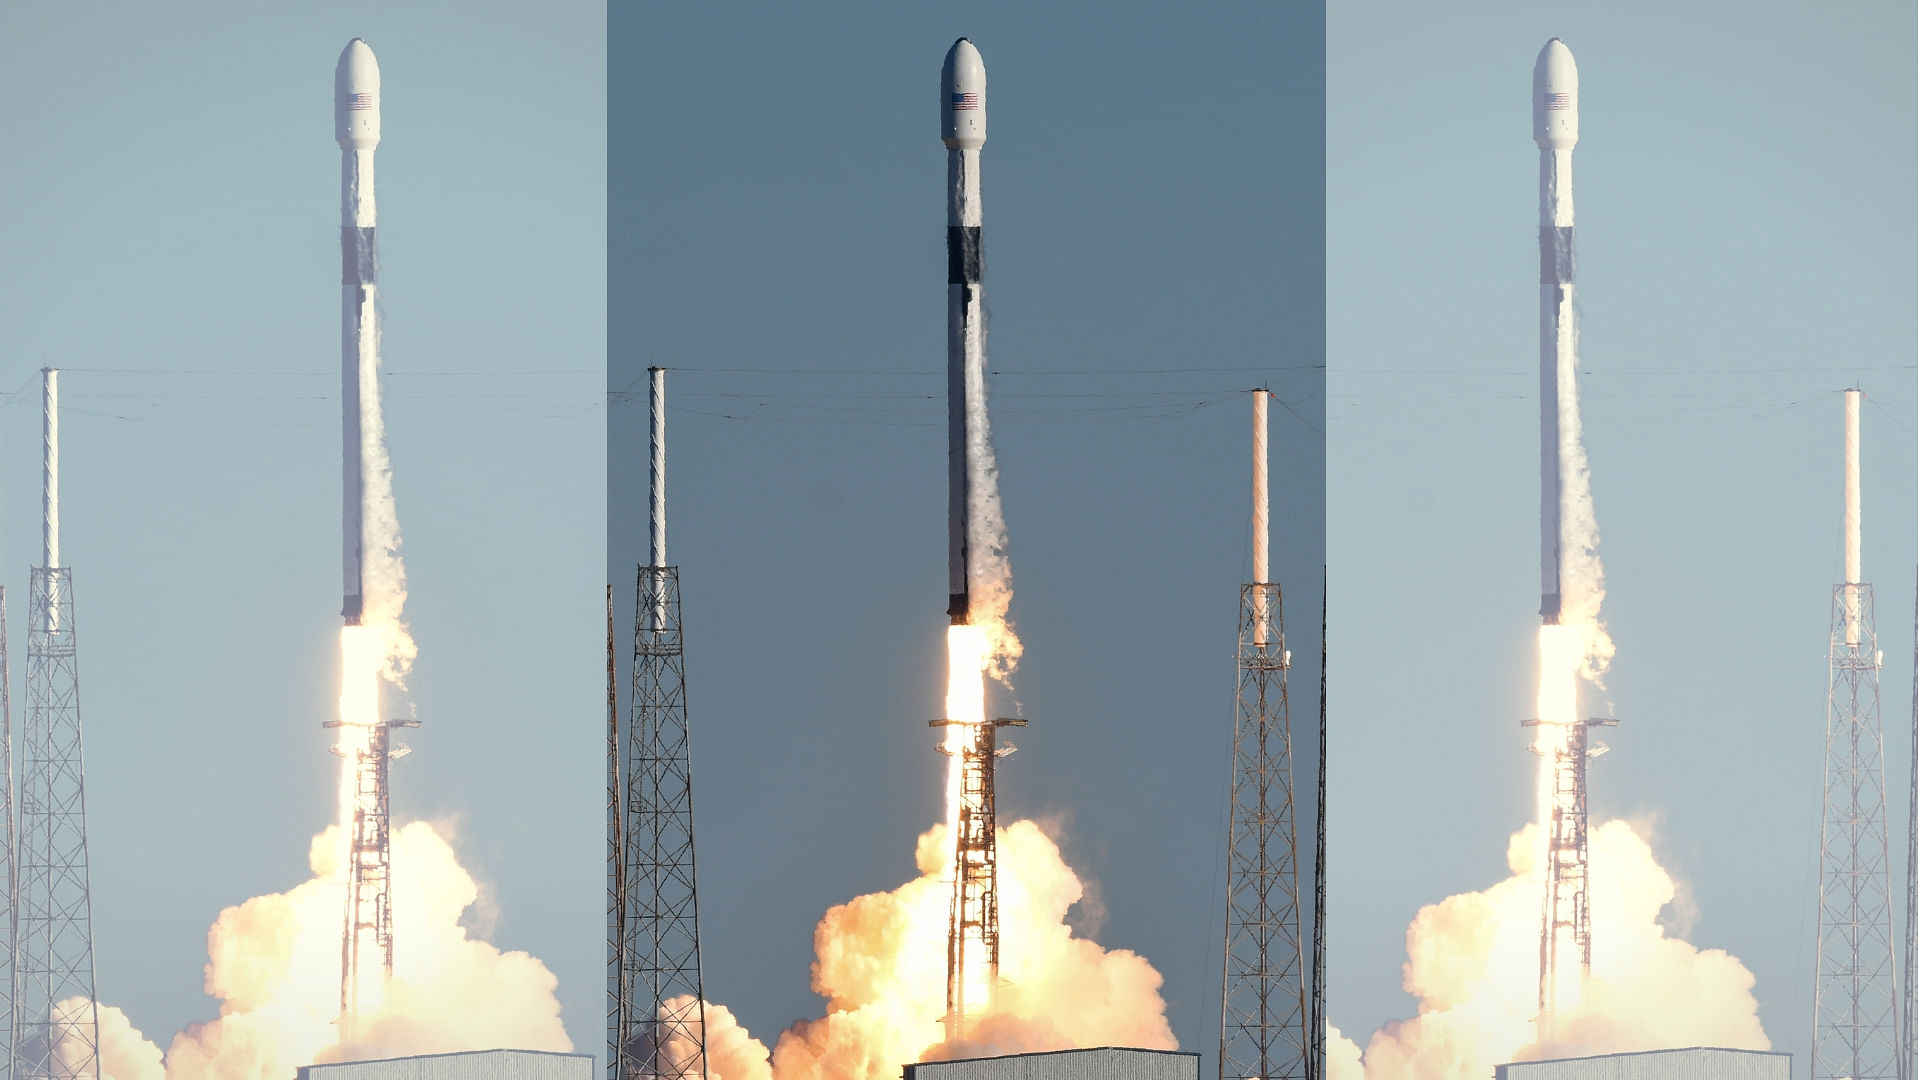 The SpaceX Falcon 9 rocket lifts off the Cape Canaveral Air Force Station, carrying the US Air Force’s most powerful GPS satellite ever built.